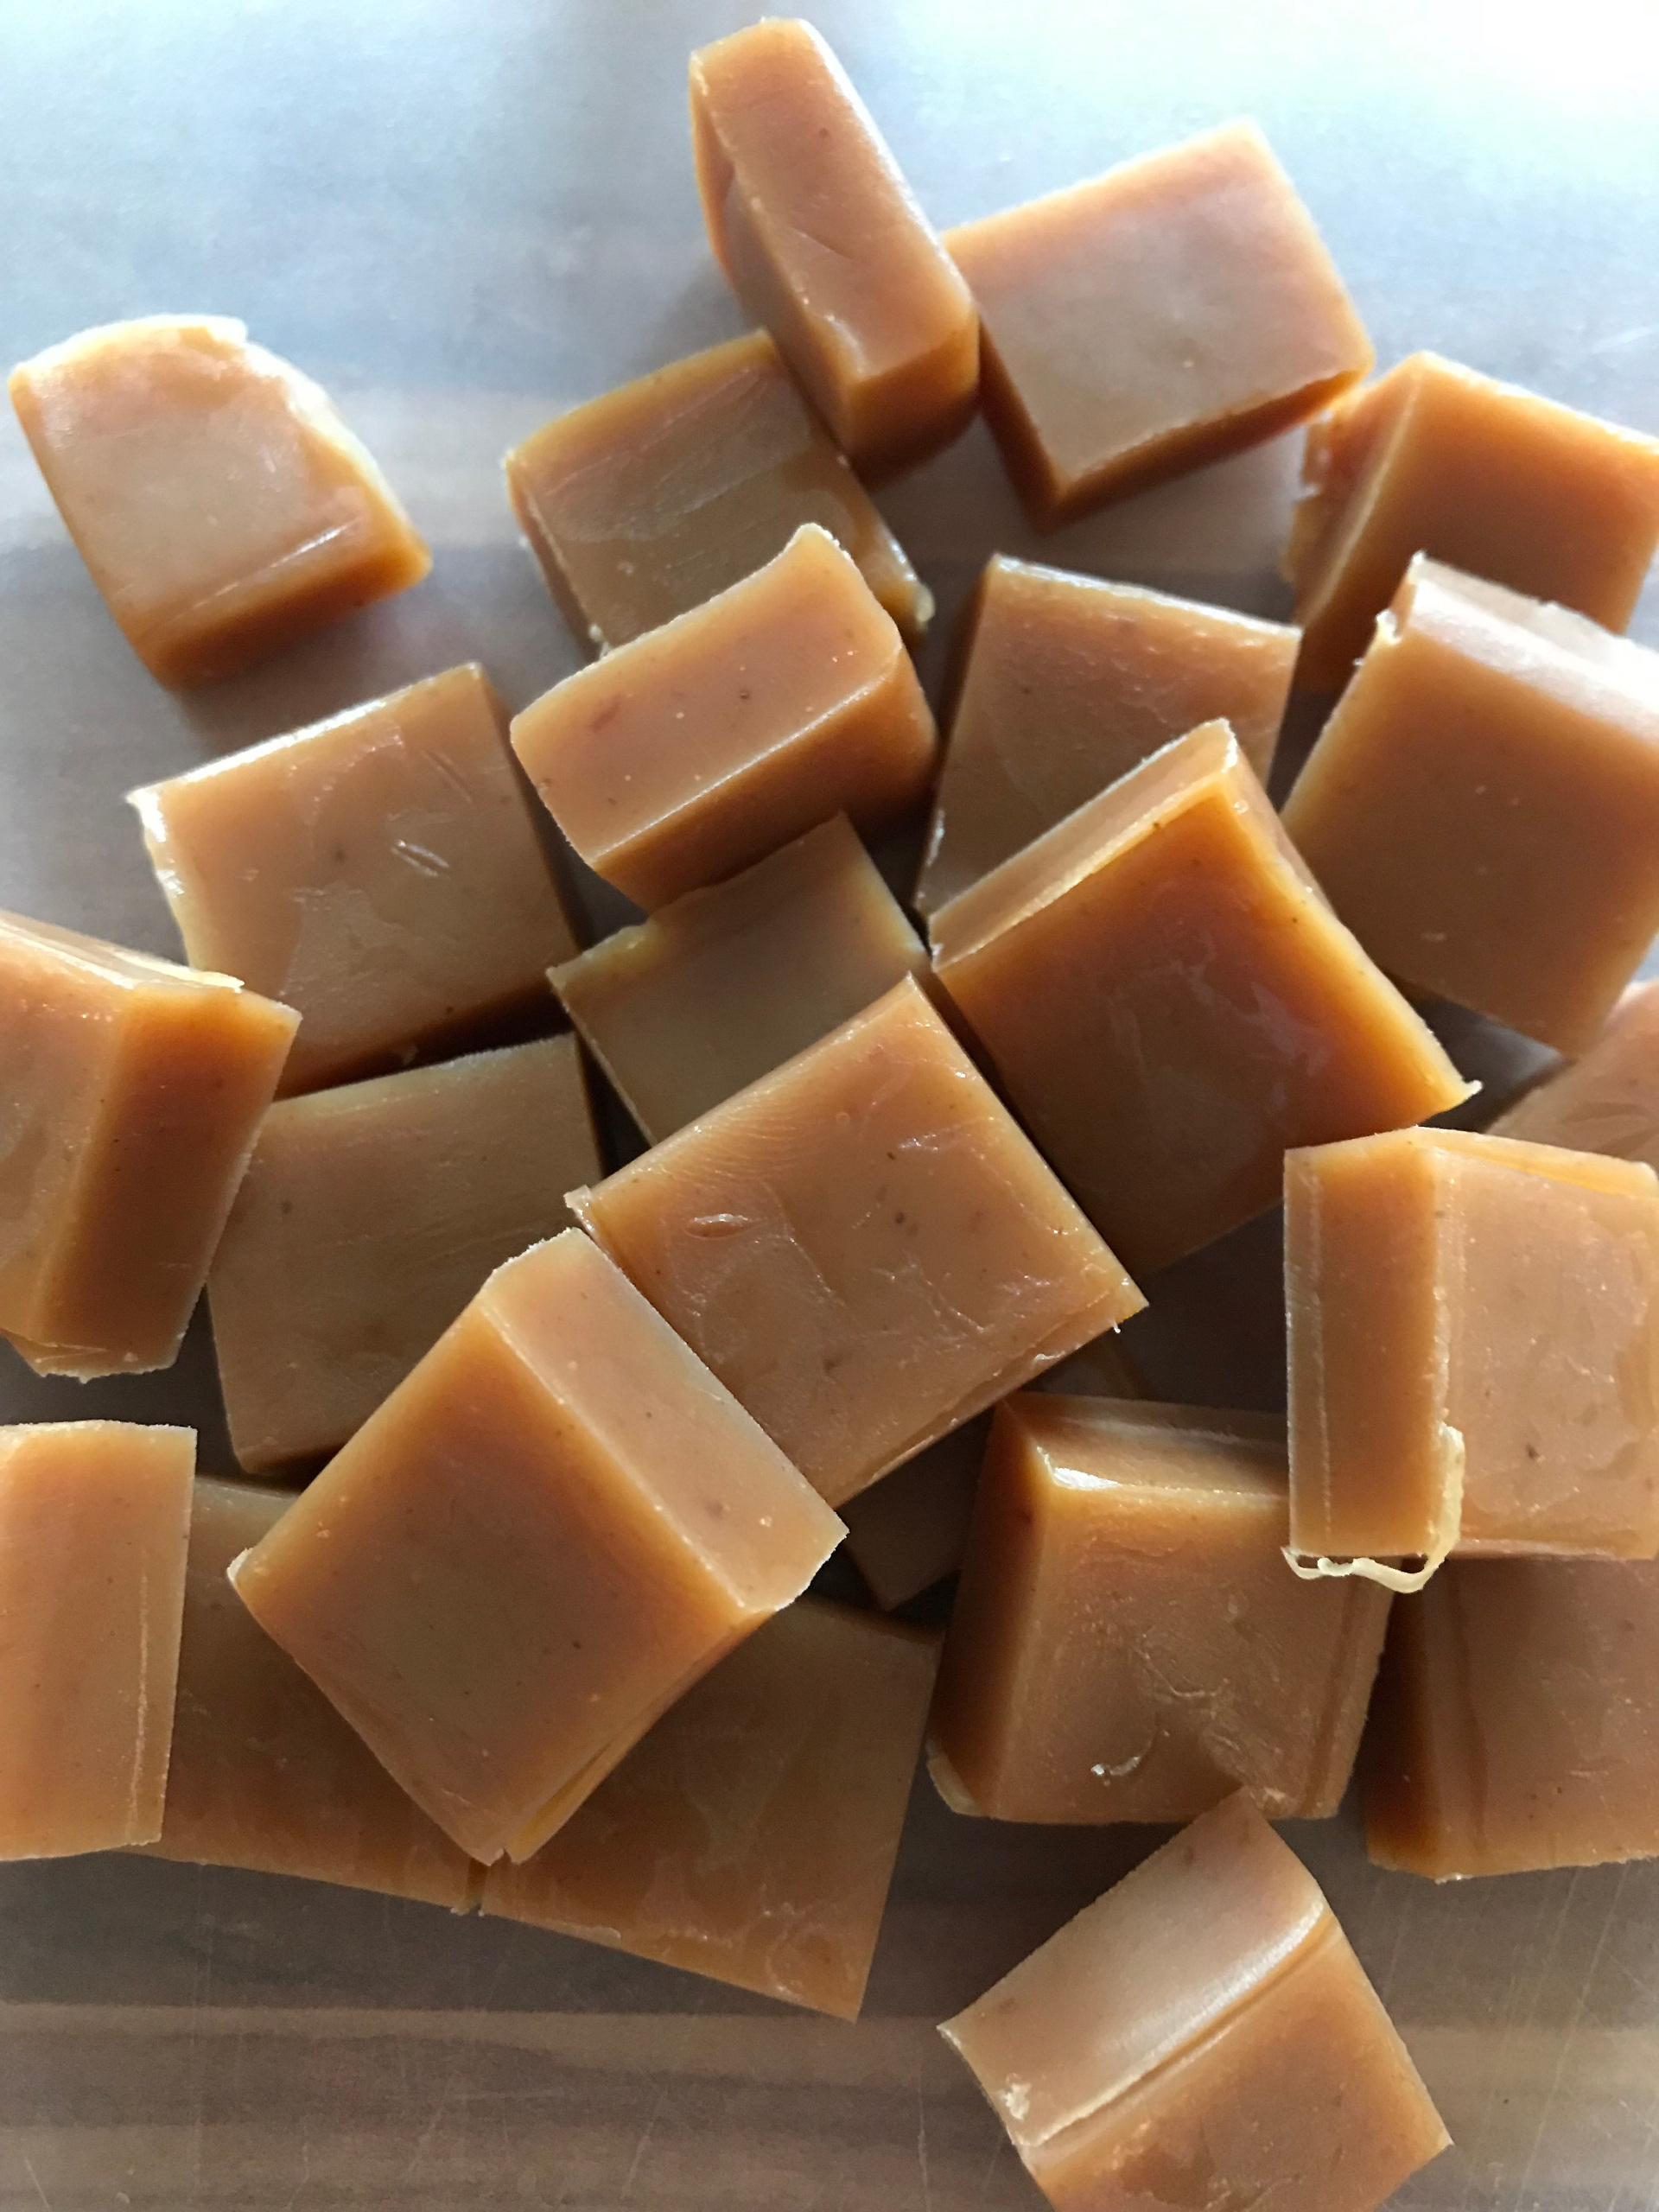 Treacle Toffee and Spiced Fudge